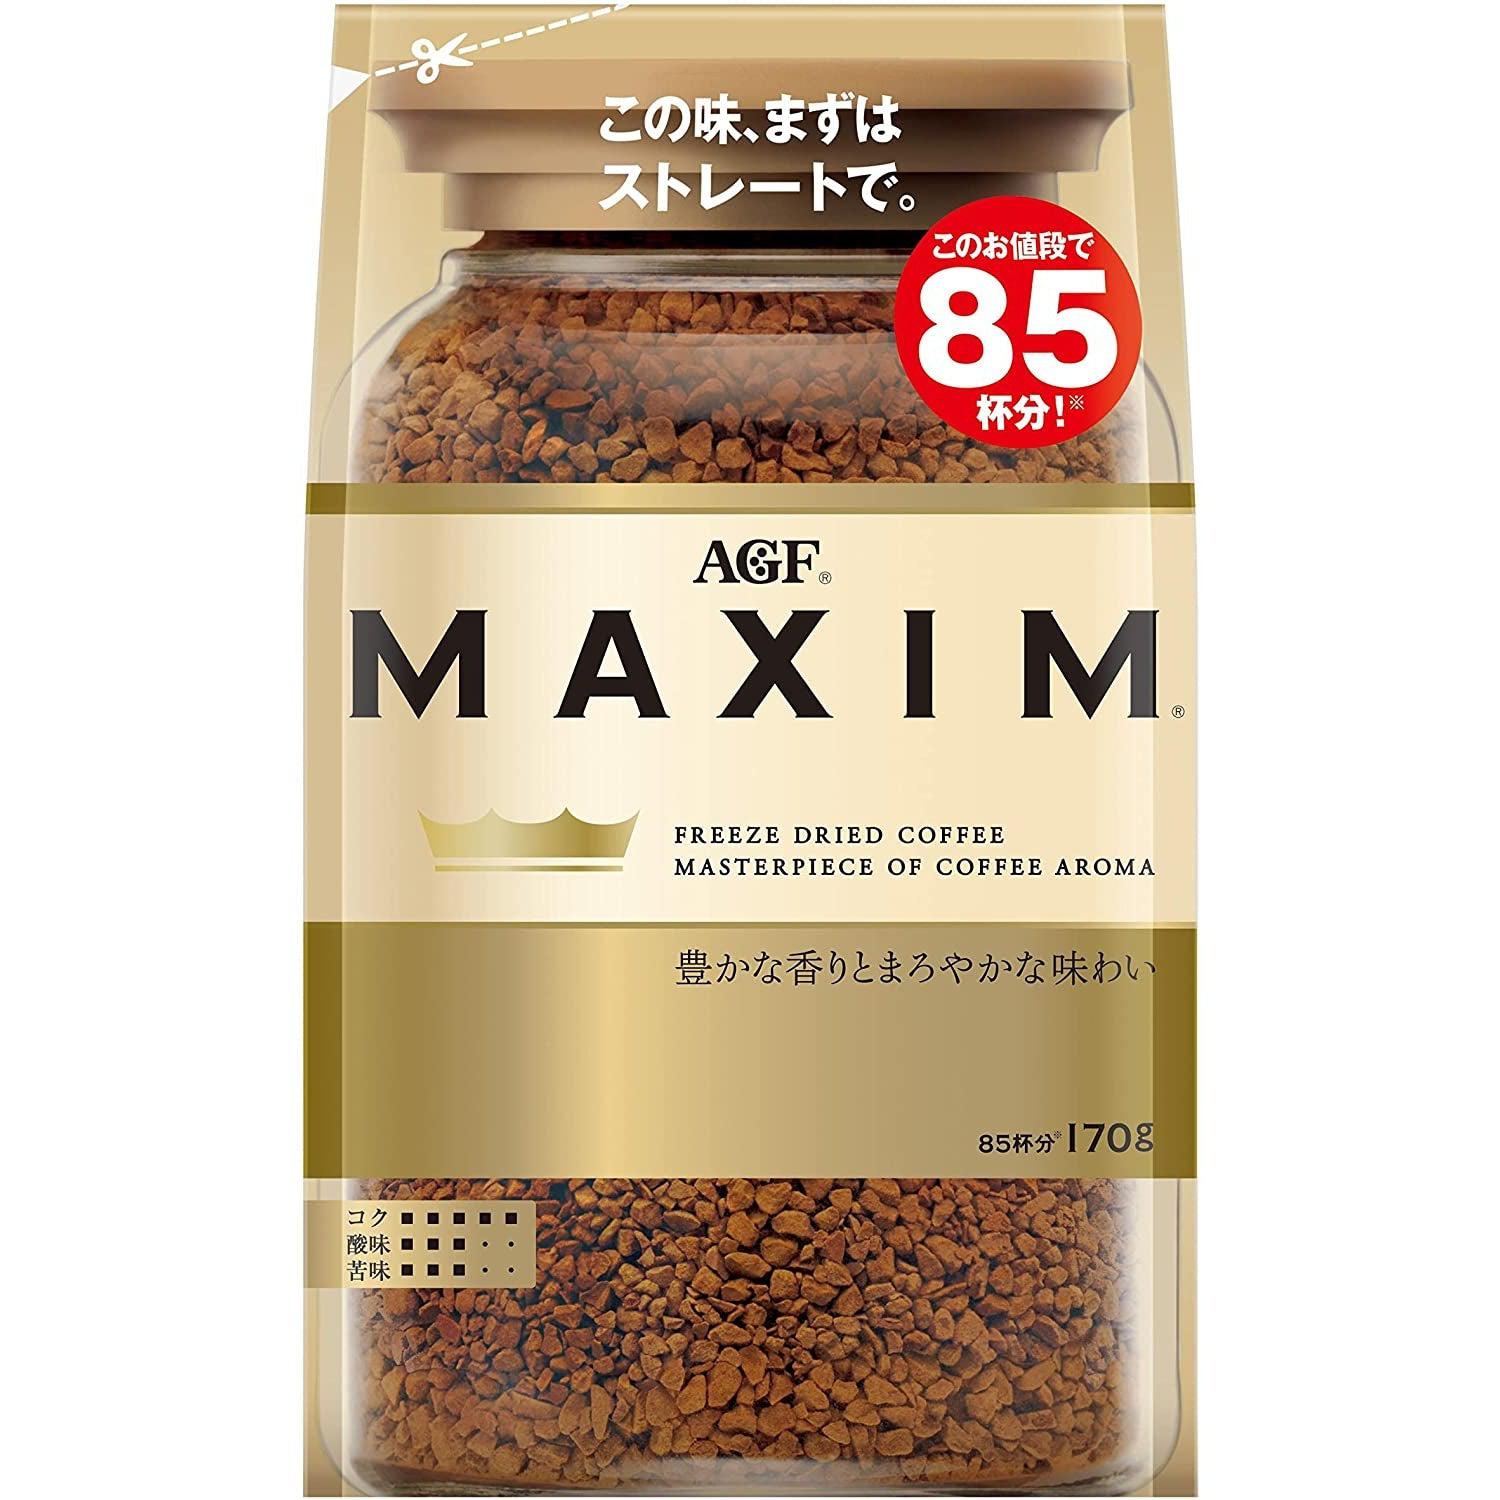 AGF Maxim Freeze-Dried Instant Coffee (Pack of 3 Bags)